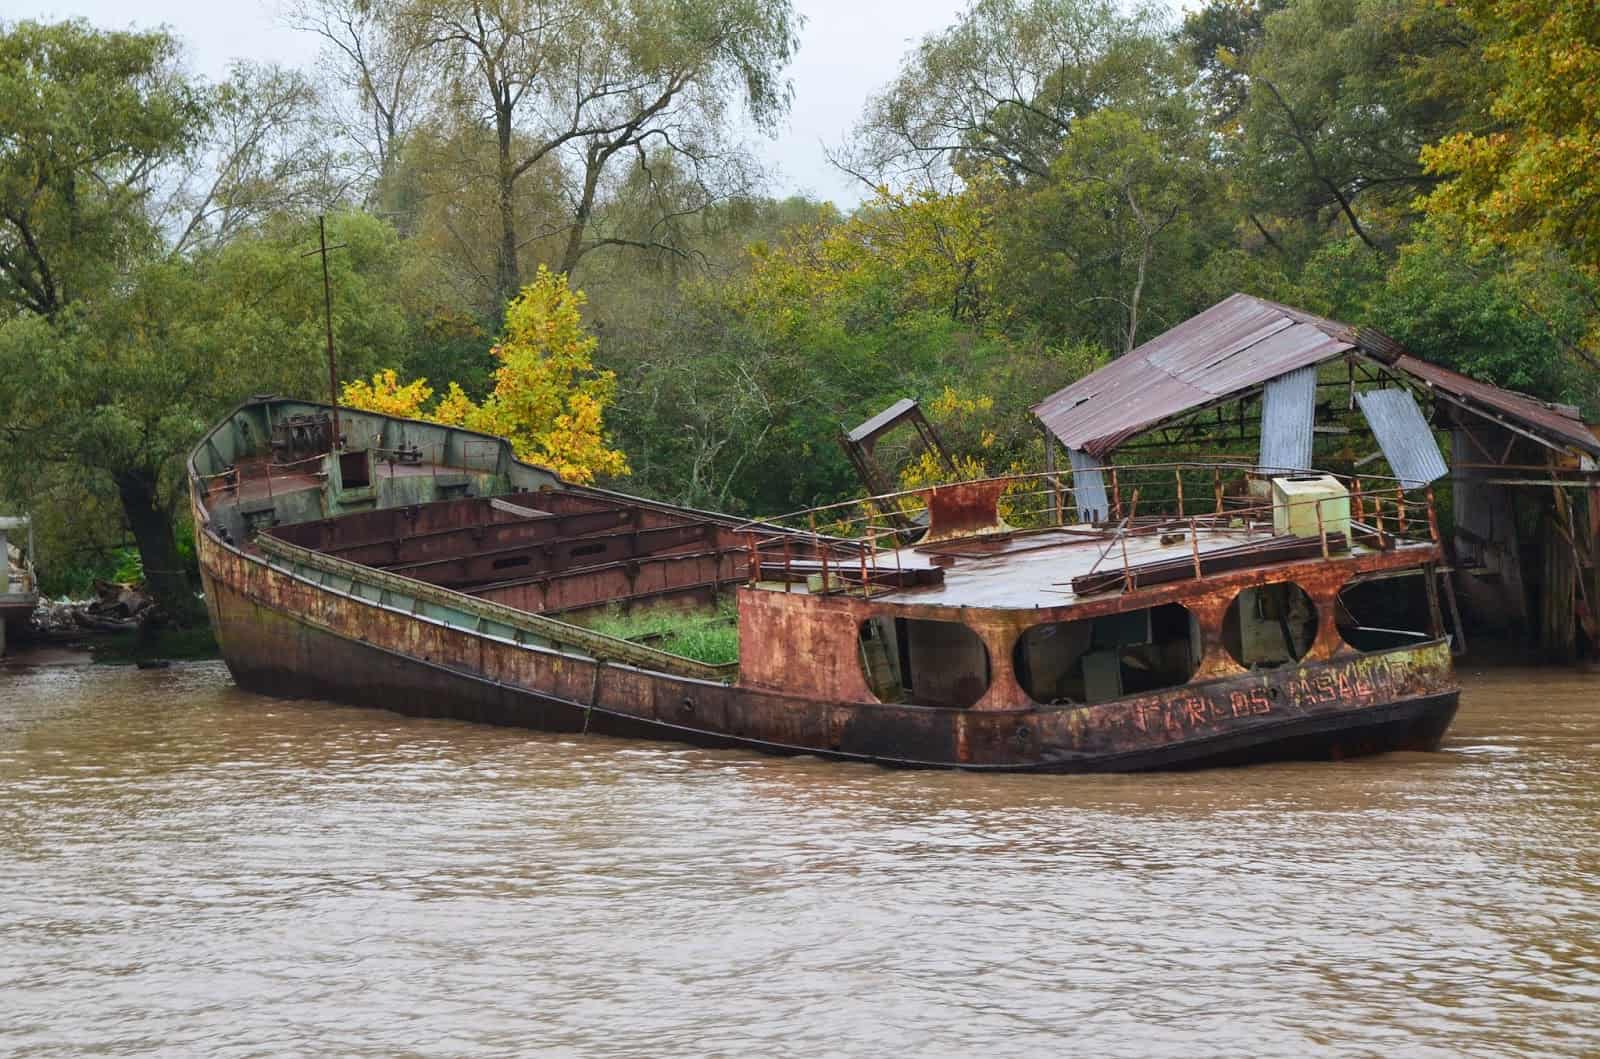 Abandoned ship in Tigre, Argentina